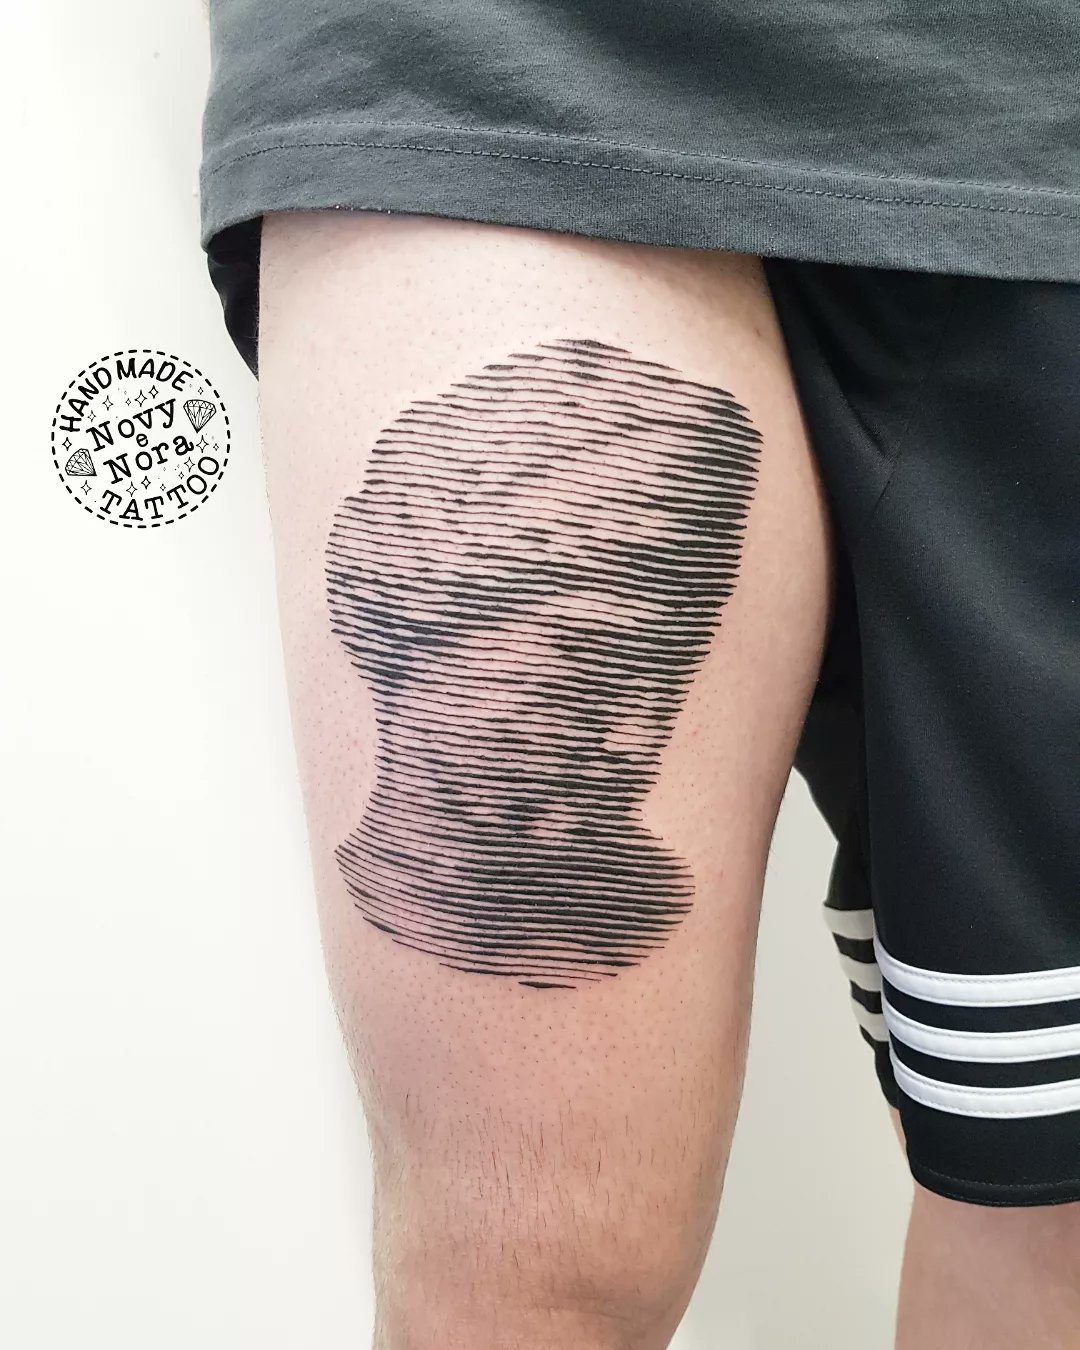 Halftone 'The First Kiss' tattoo located on the thigh.